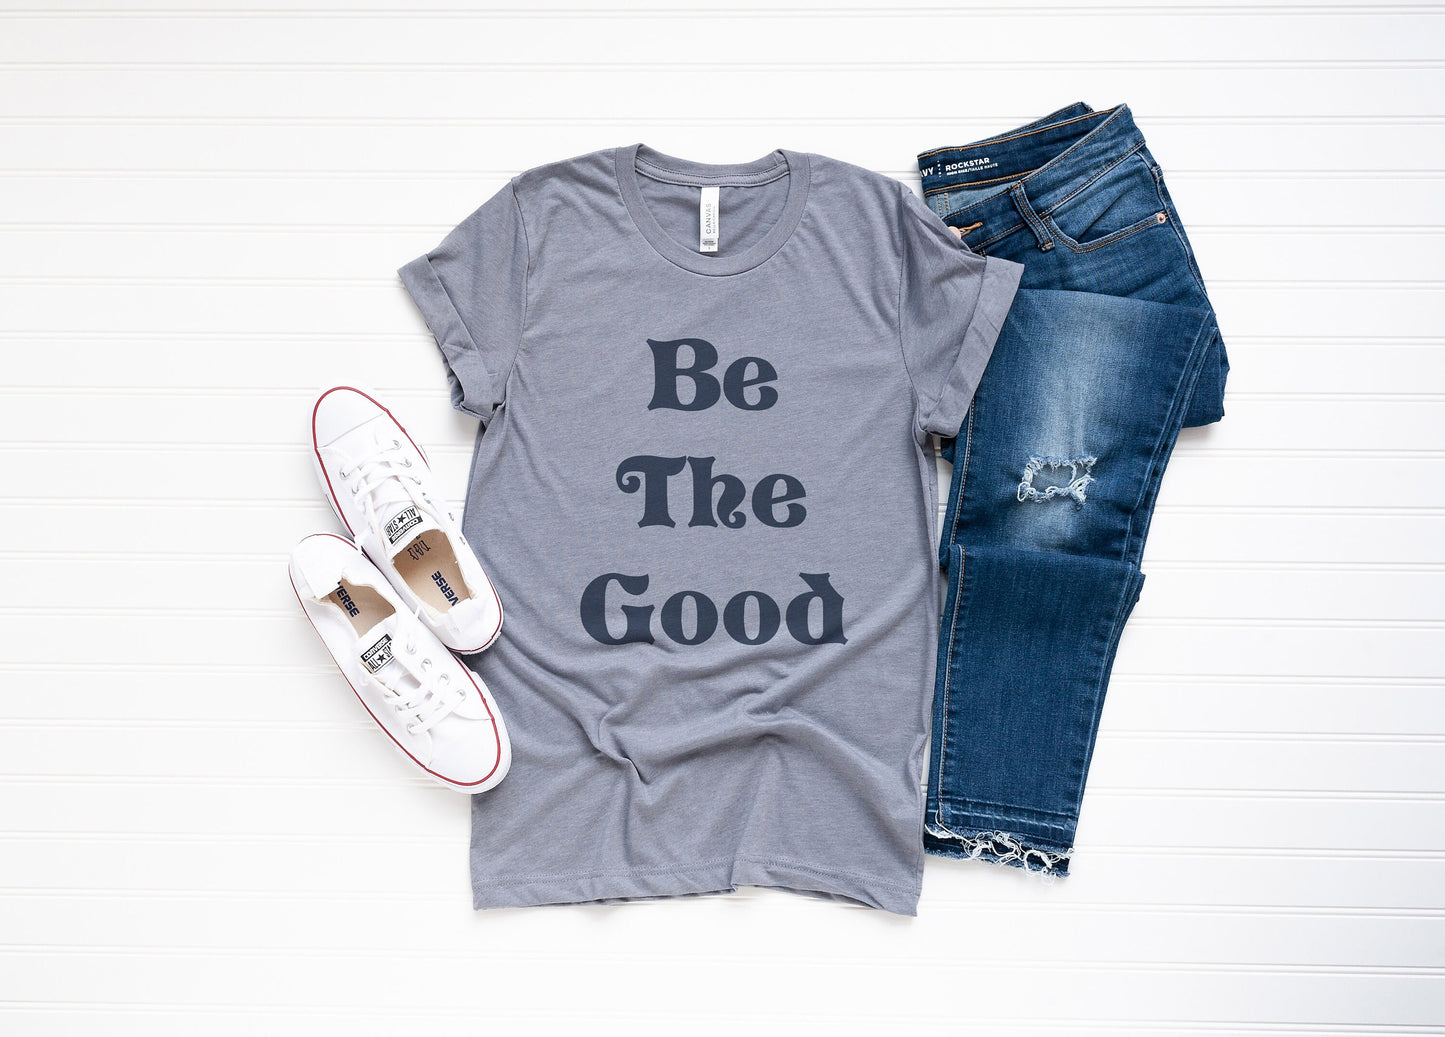 Be The Good Cottage Core Inspirational Uplifting Ultra Soft Graphic Tee Unisex Soft Tee T-shirt for Women or Men